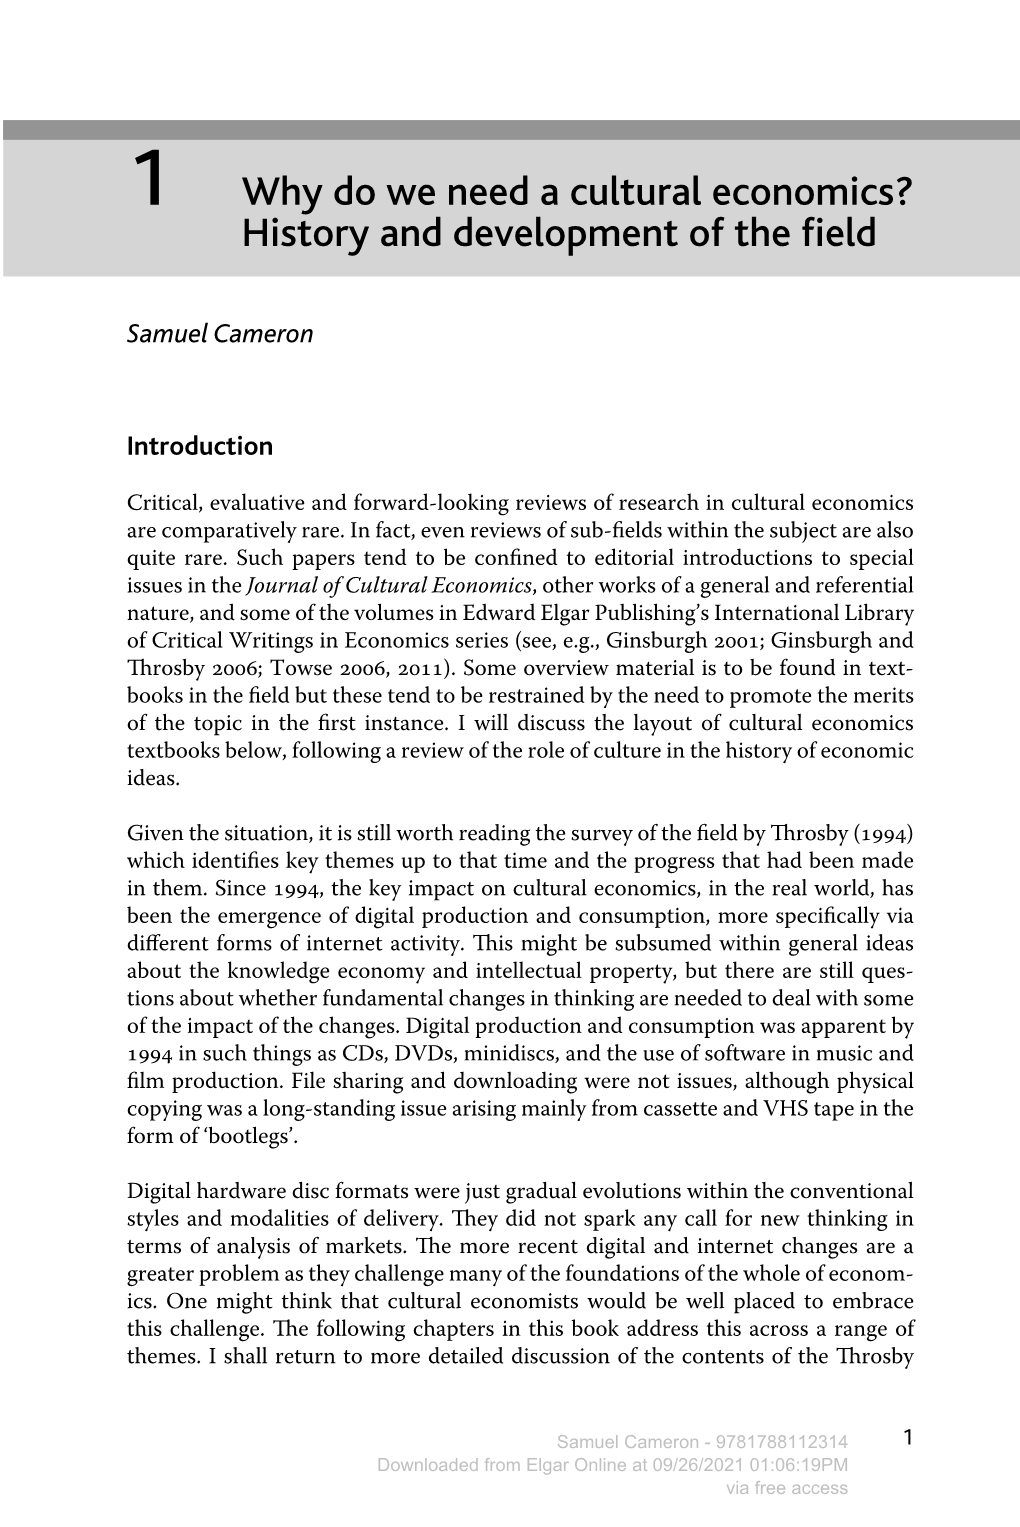 1 Why Do We Need a Cultural Economics? History and Development of the Field